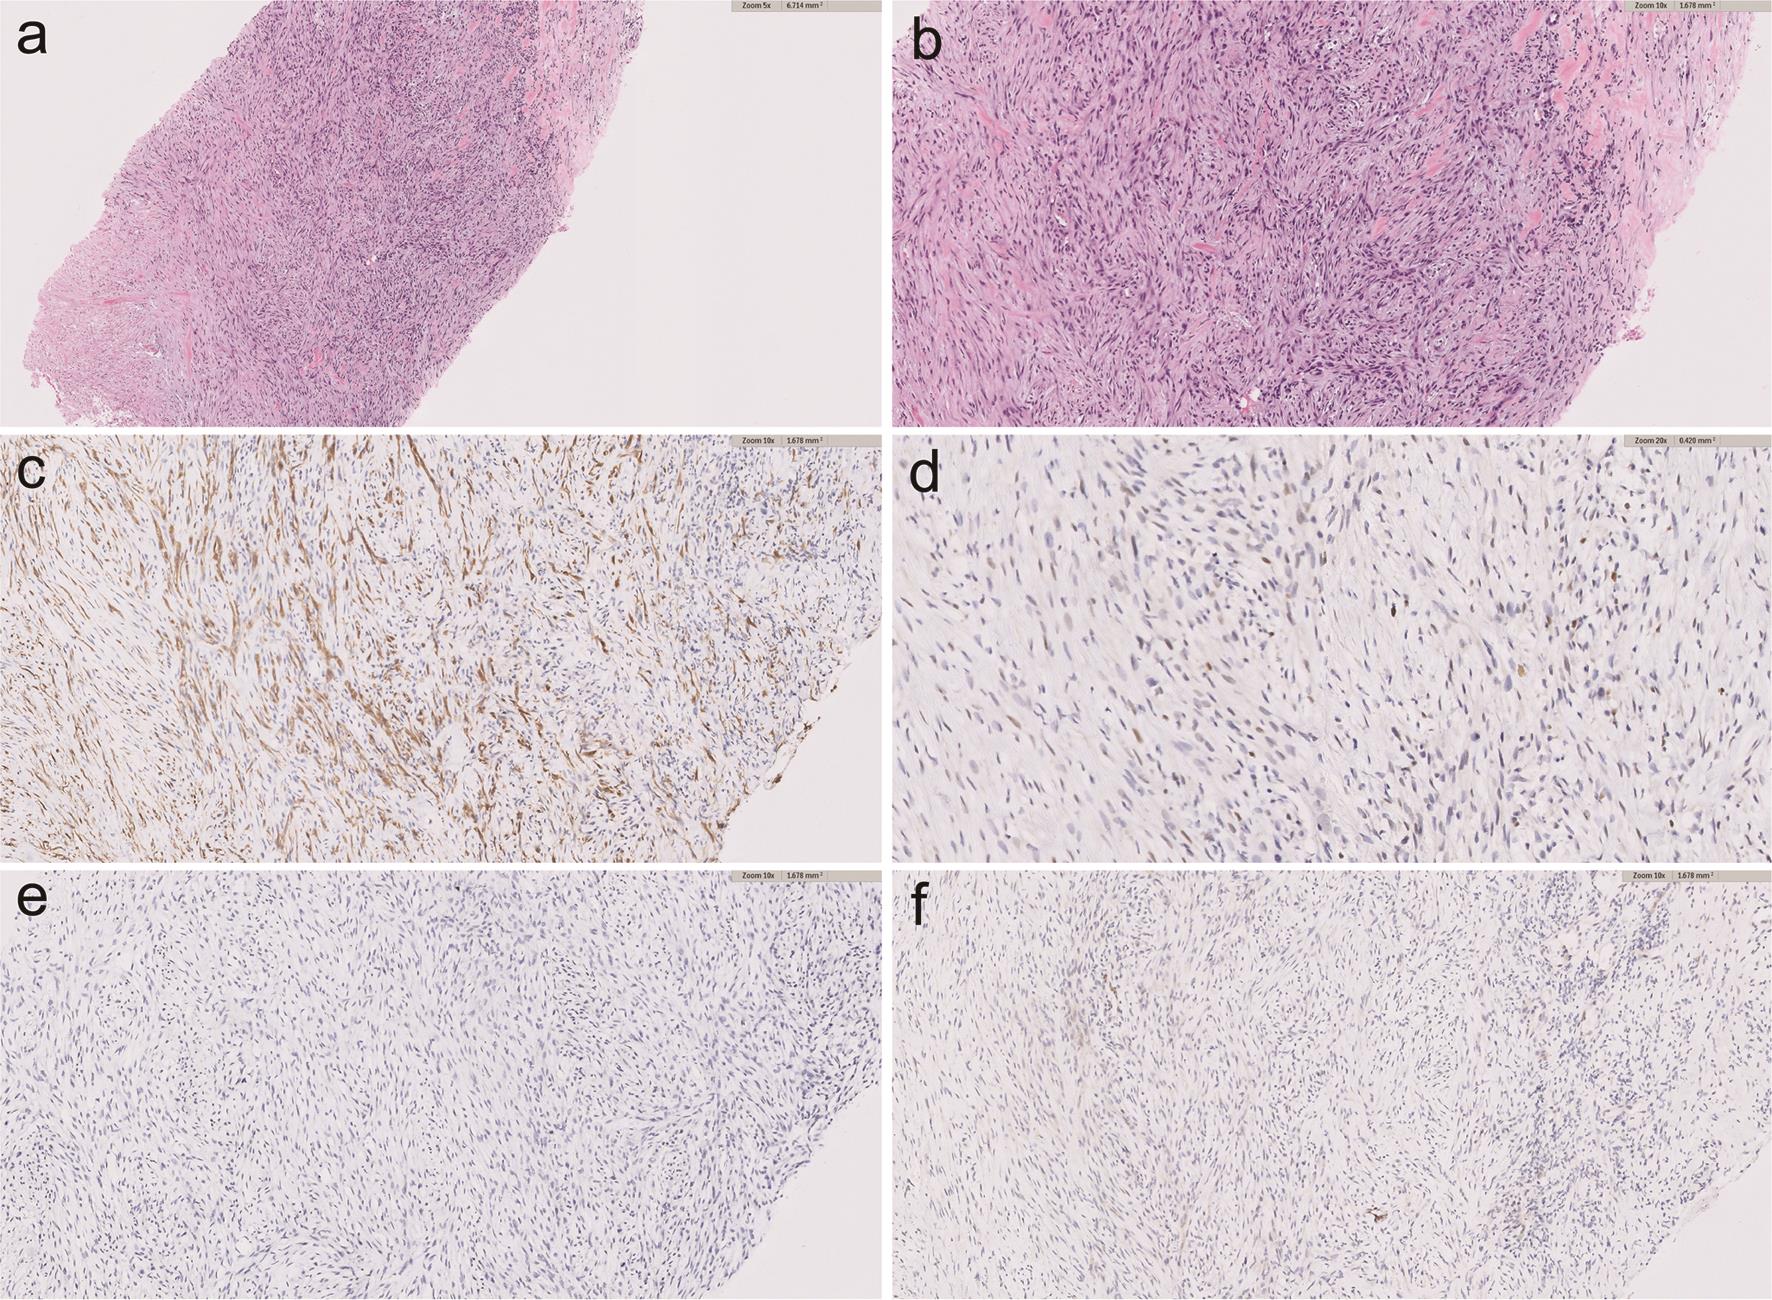 Fibromatosis-like spindle cell carcinoma shows the tumor infiltrates into the surrounding breast parenchyma (a). The tumor is composed of cytologically bland spindle shaped cells with small round to oval nuclei. Also note the lack of mitotic figures (b). The tumor cells are positive for AE1/AE3 (c), focally positive for GATA binding protein 3 (GATA3) (d), and negative for ER (f) and desmin (f). a, ×5; b–c, e–f, ×10; d, ×20.